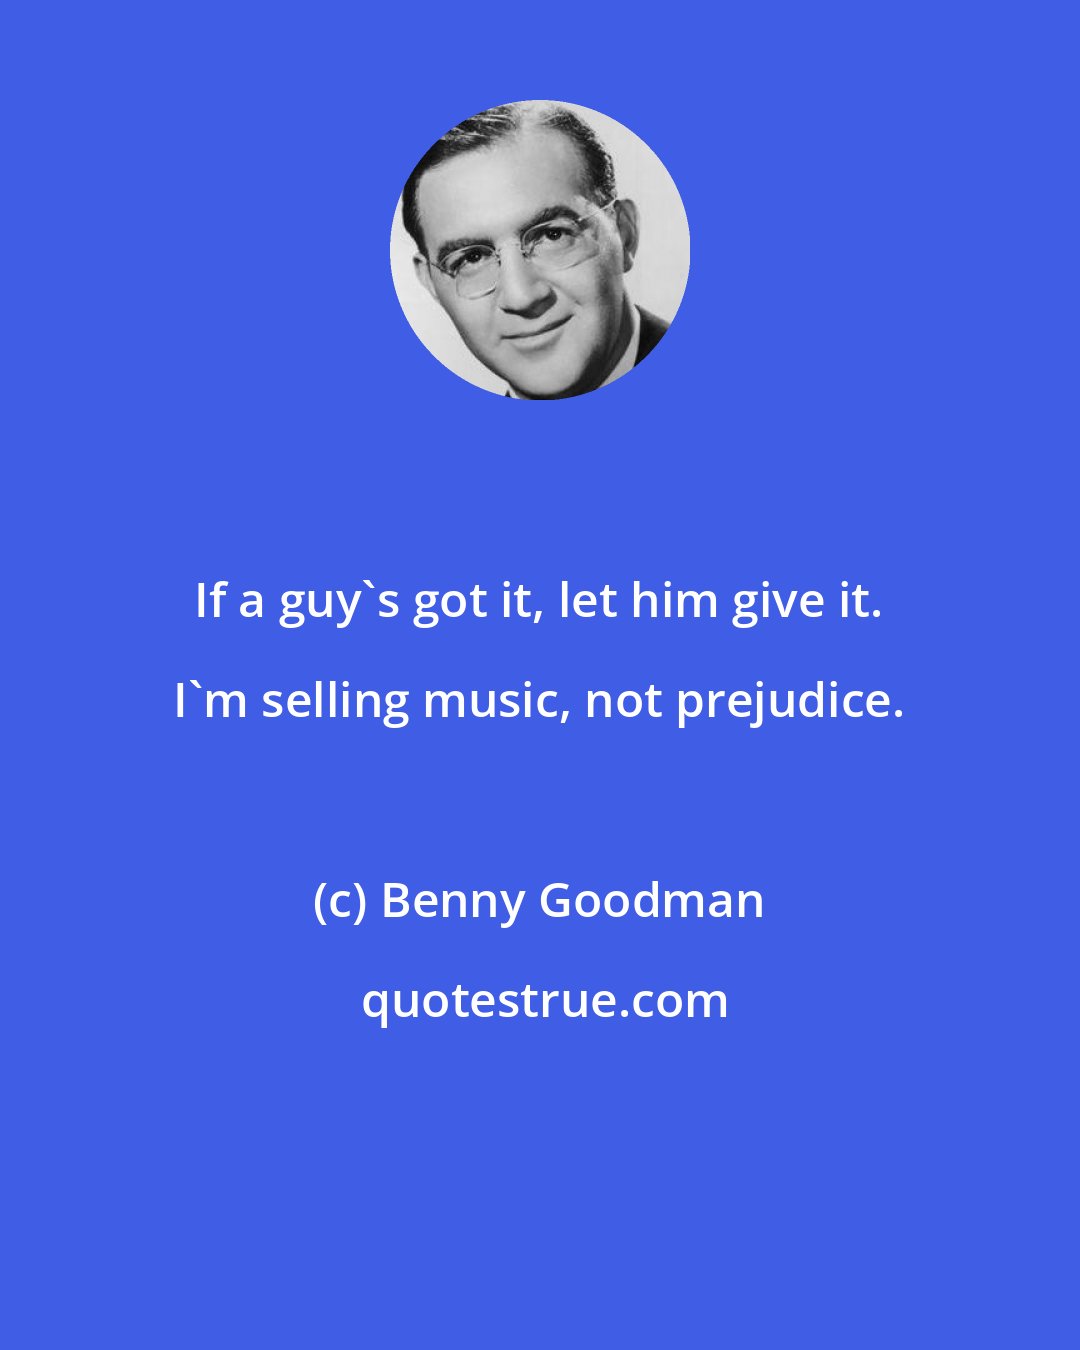 Benny Goodman: If a guy's got it, let him give it. I'm selling music, not prejudice.